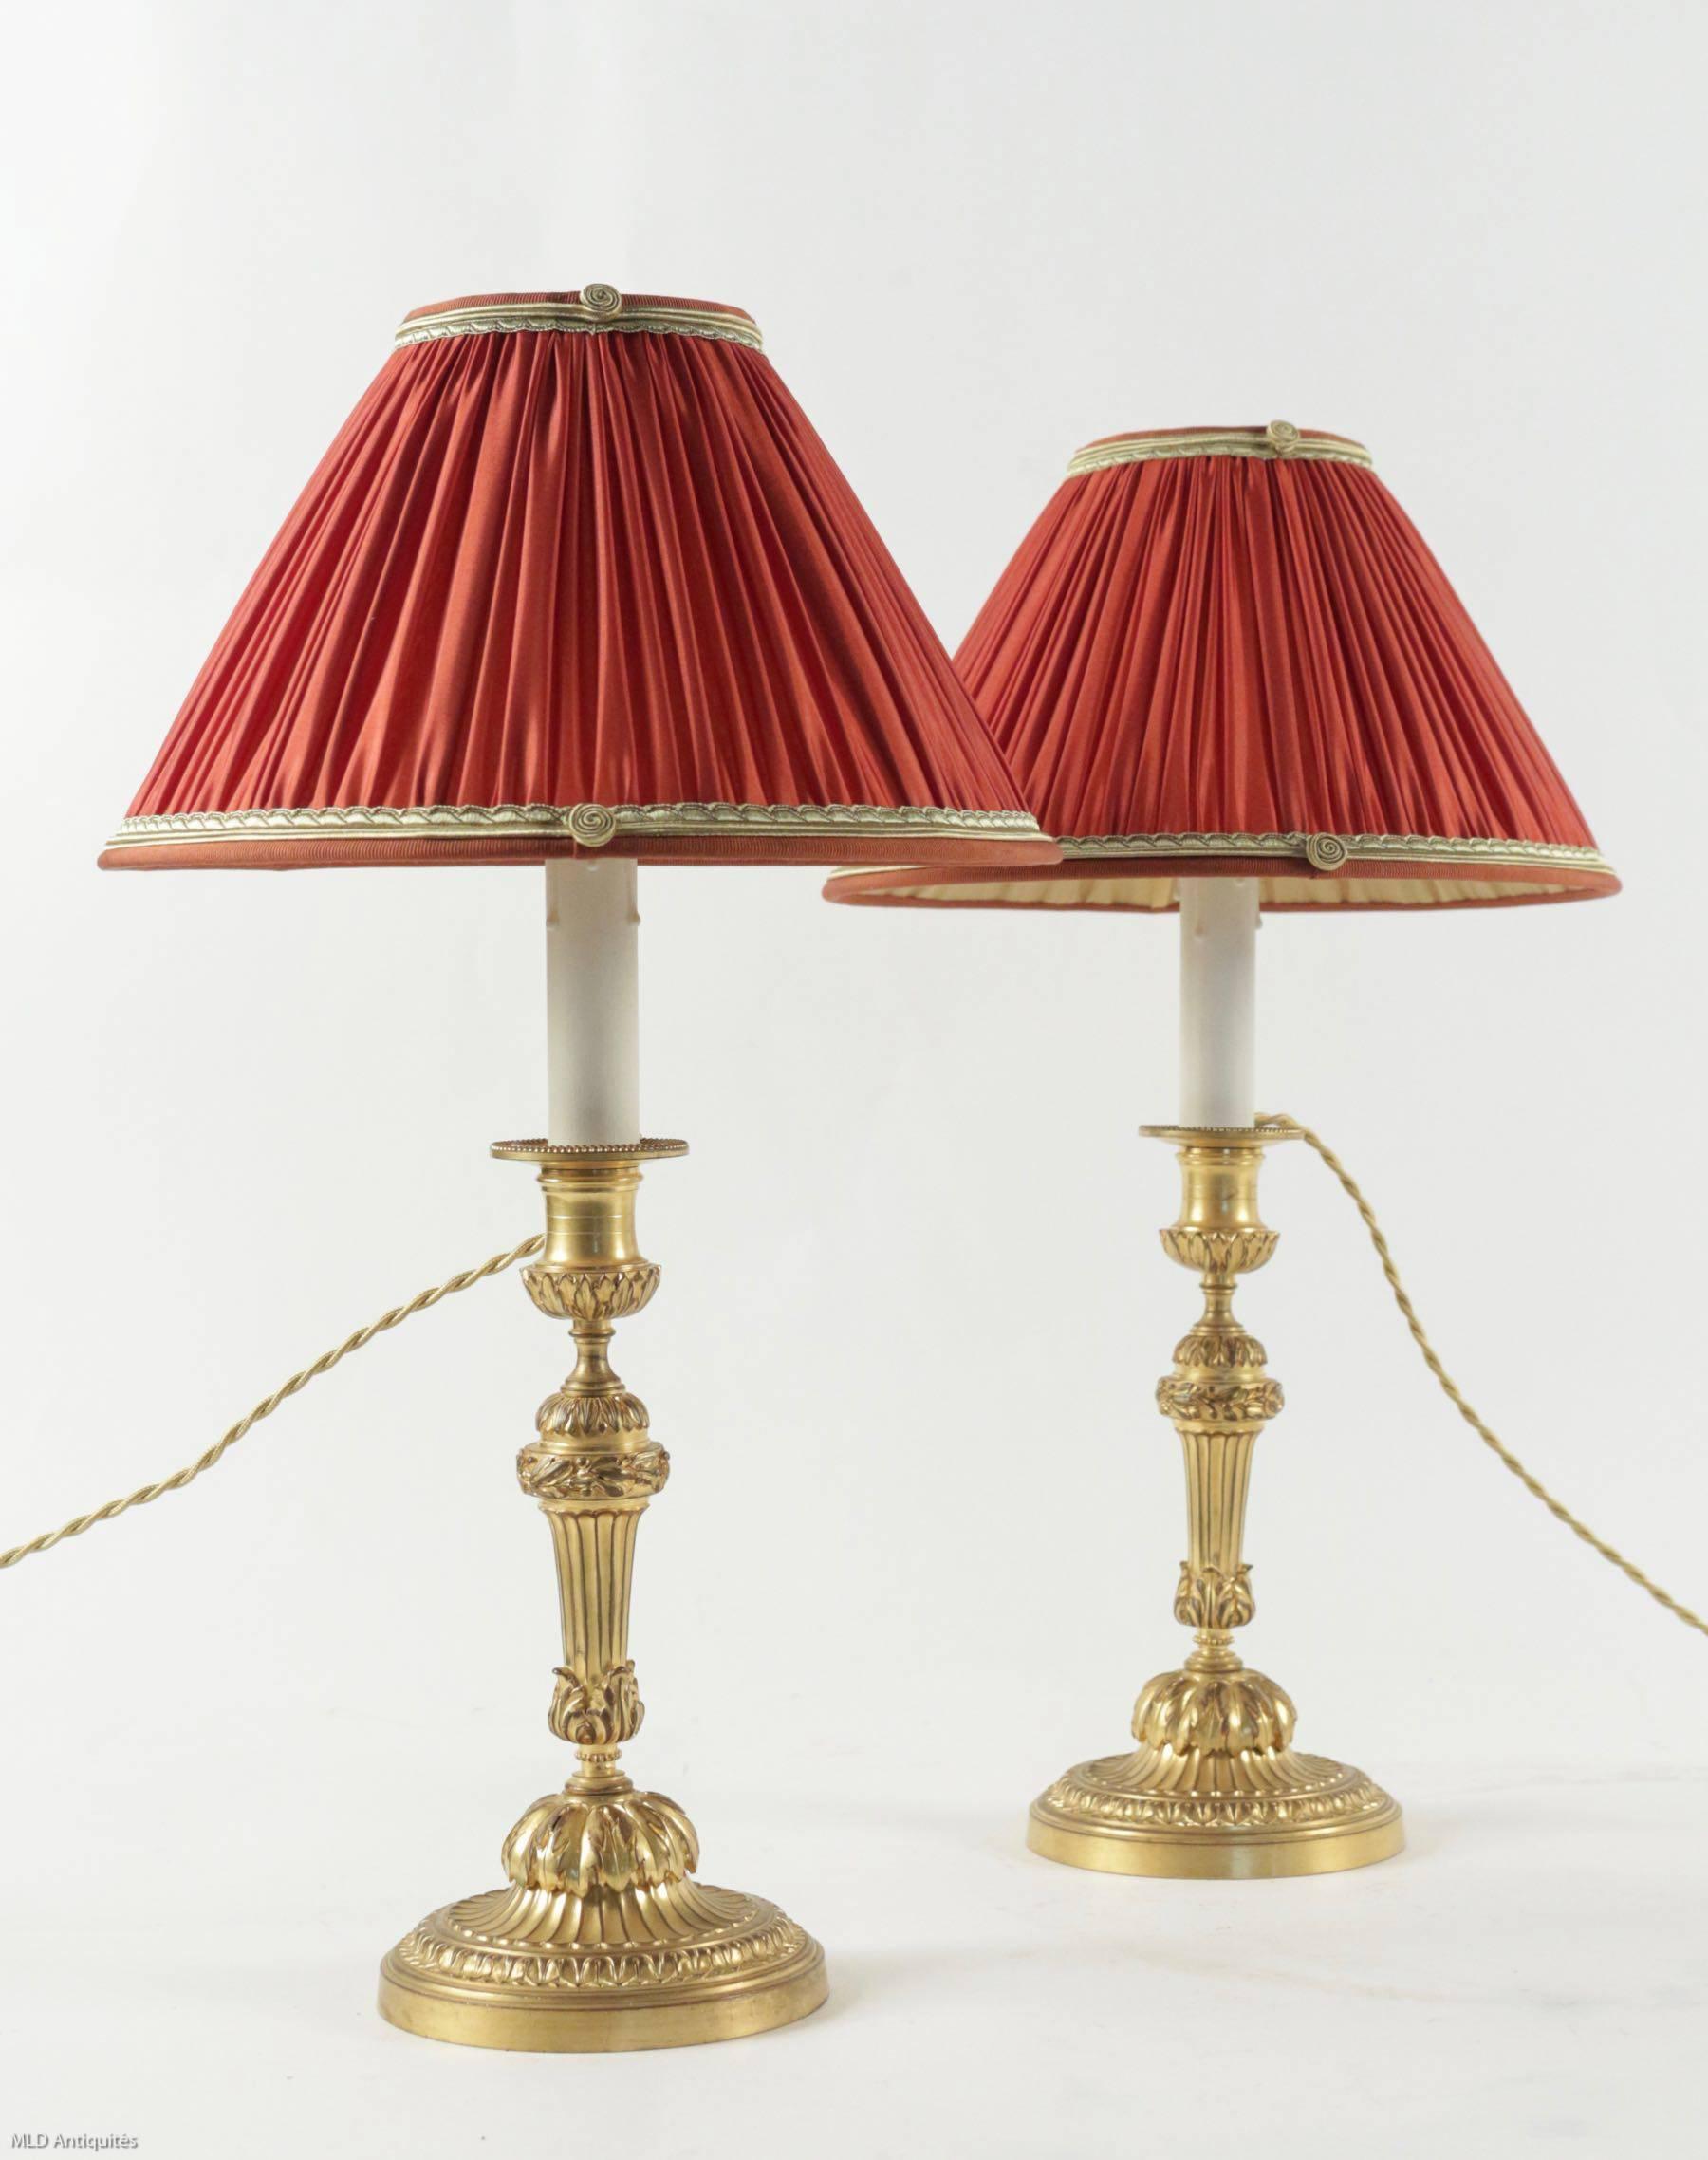 Gilt Early 19h Century Pair of French Louis XVI Style Ormolu Candlestick Lamps